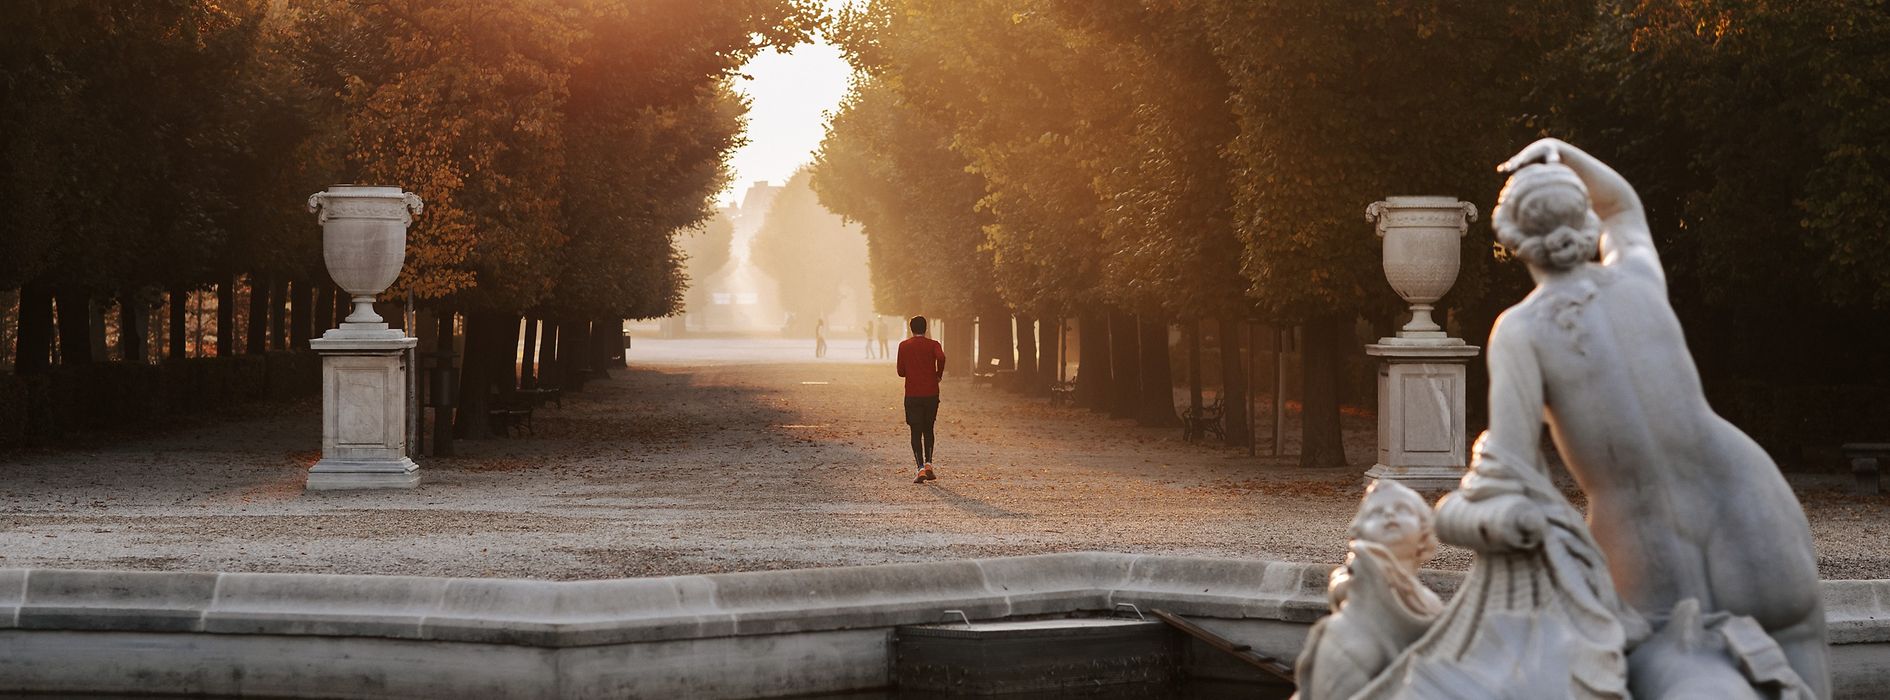 Avenue with joggers in Schönbrunn Palace park